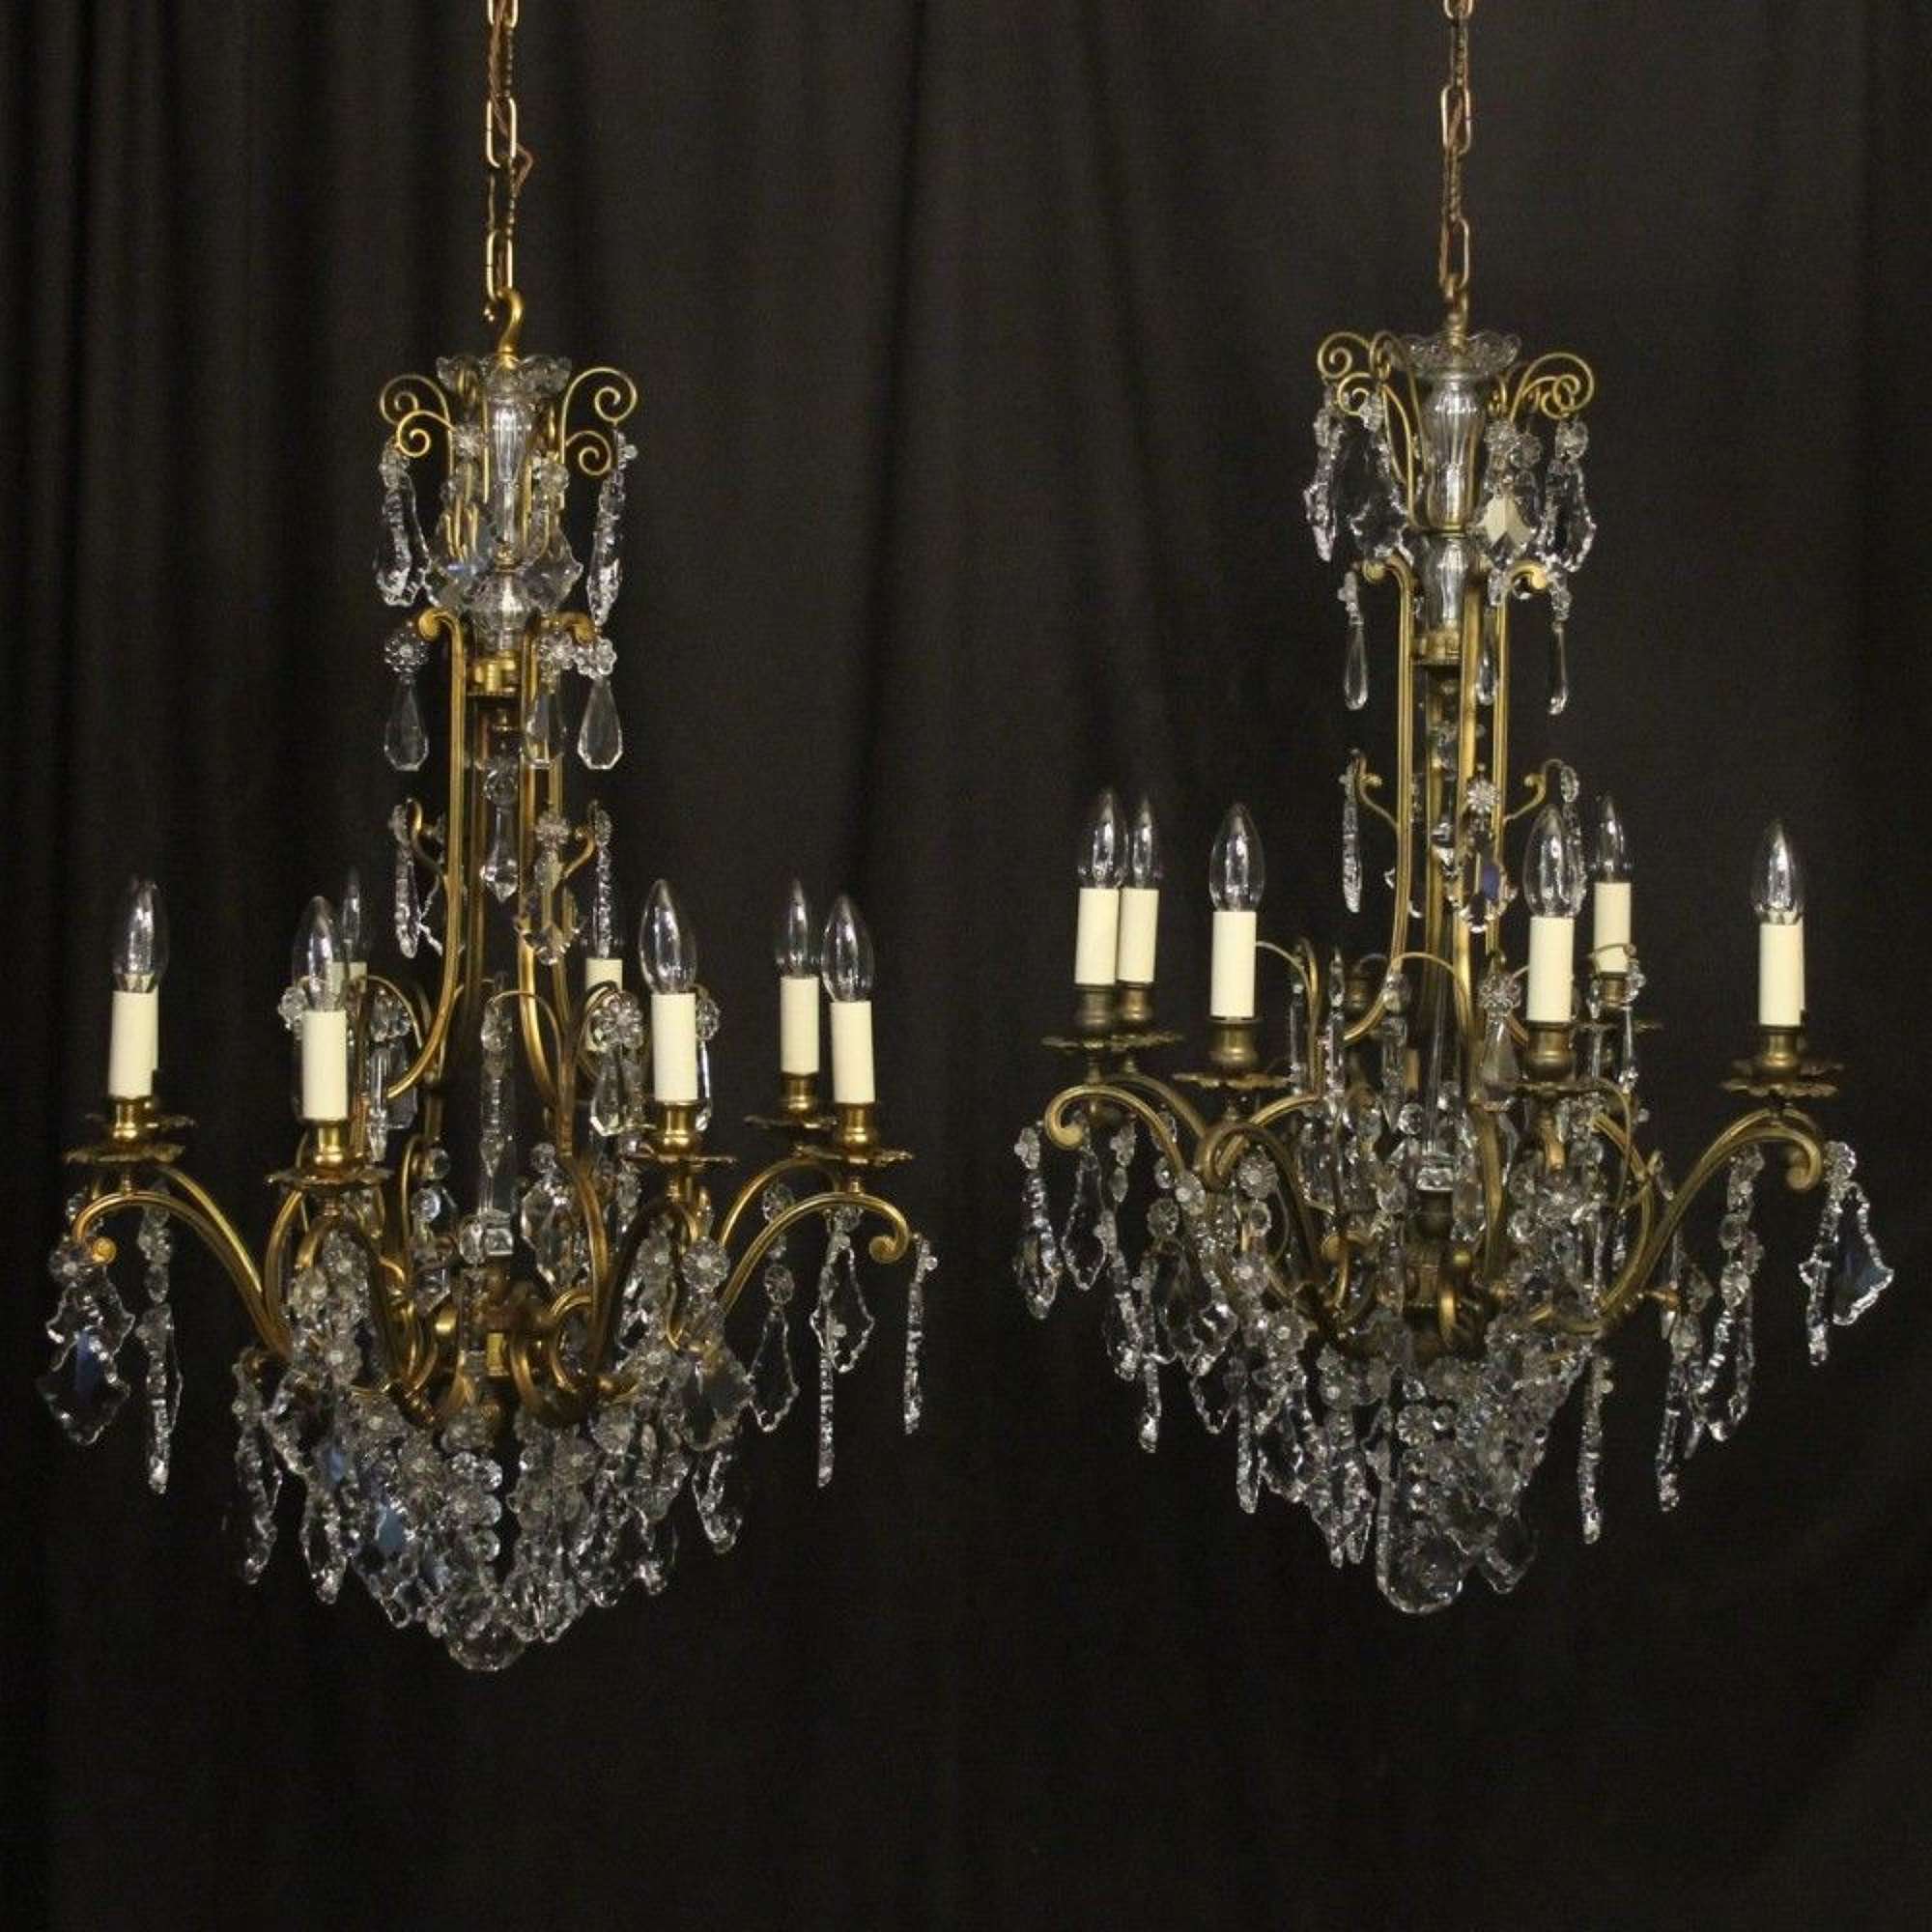 French Pair Of Bronze & Crystal 8 Light Antique Chandeliers